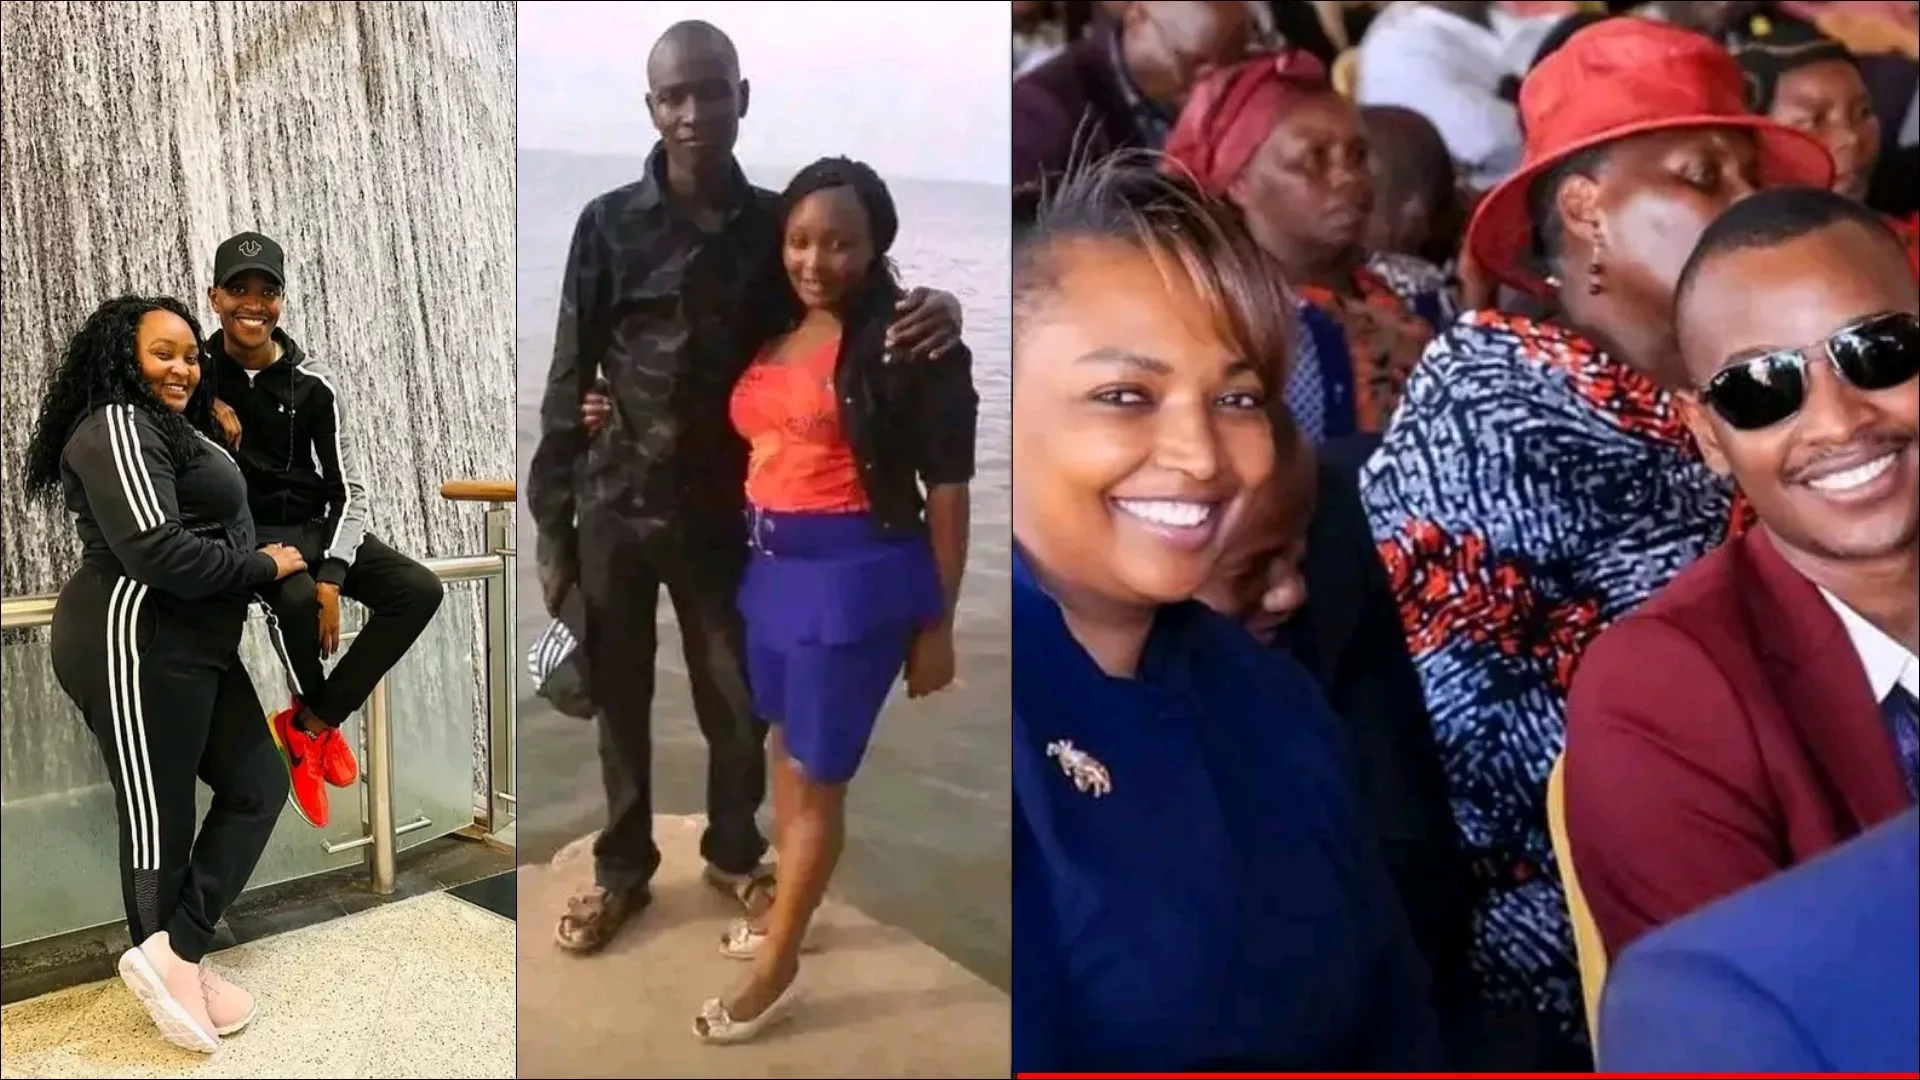 Kenyan popular Mugithi Singer Samidoh has once again stirred his wife Edday Nderitu's anger. This is after the Singer was spottes with baby mama Karen Nyamu in a function. The photos that have gone viral on social media, the two love birds were seen wearing smiley faces. While reacting to the photos, Edday Nderitu poured her anger in a long Instagram post. Edday lamented that the last three years of their marriage has been full of pain. "It has been exactly 15 years of marriage full of ups and down, it was humble beginning where little was enough for us, for the last 3years it has been nothing but pain." The mother of 3 said that she has been faithful to Samidoh despite his high level if disrespect and humiliation. "I have remained faithful to you regardless of disrespect,humiliation and being trolled on social media ,you’ve made me look dumb and took my silence for granted, I have helped you nature your talent and supported you through it all." In her emotional message to Samidoh, Edday reiterated thay she is not ready to raise her kids in a polygamous marriage, terming Nyamu as older and mannerless. She said that she is done stomaching the pain of being humiliated. "one thing I have said to you and I am saying here again I will not raise my kids in a polygamy family, especially with a woman who is older than me by more than 10yrs ,has no morals and zero respect to my family’kiura Kia ngaba’ as you put it." "I have asked God every day to give me strength to pray for you but today I have nothing to tell God about you, you have drag and put me and my kids in an ocean of pain may you remember this day.#nothingbutprayers #eddaynderitu." The incident comes months after Karen Nyamu announced that she had ended her relationship with the 'wendo wi cama' singer. She said so after an altercation with Edday during Samidoh's concert in Dubai. "From today I have nothing to do with Samidoh. I have decided to end my relationship with him," Karen said in a video she shared on social media.